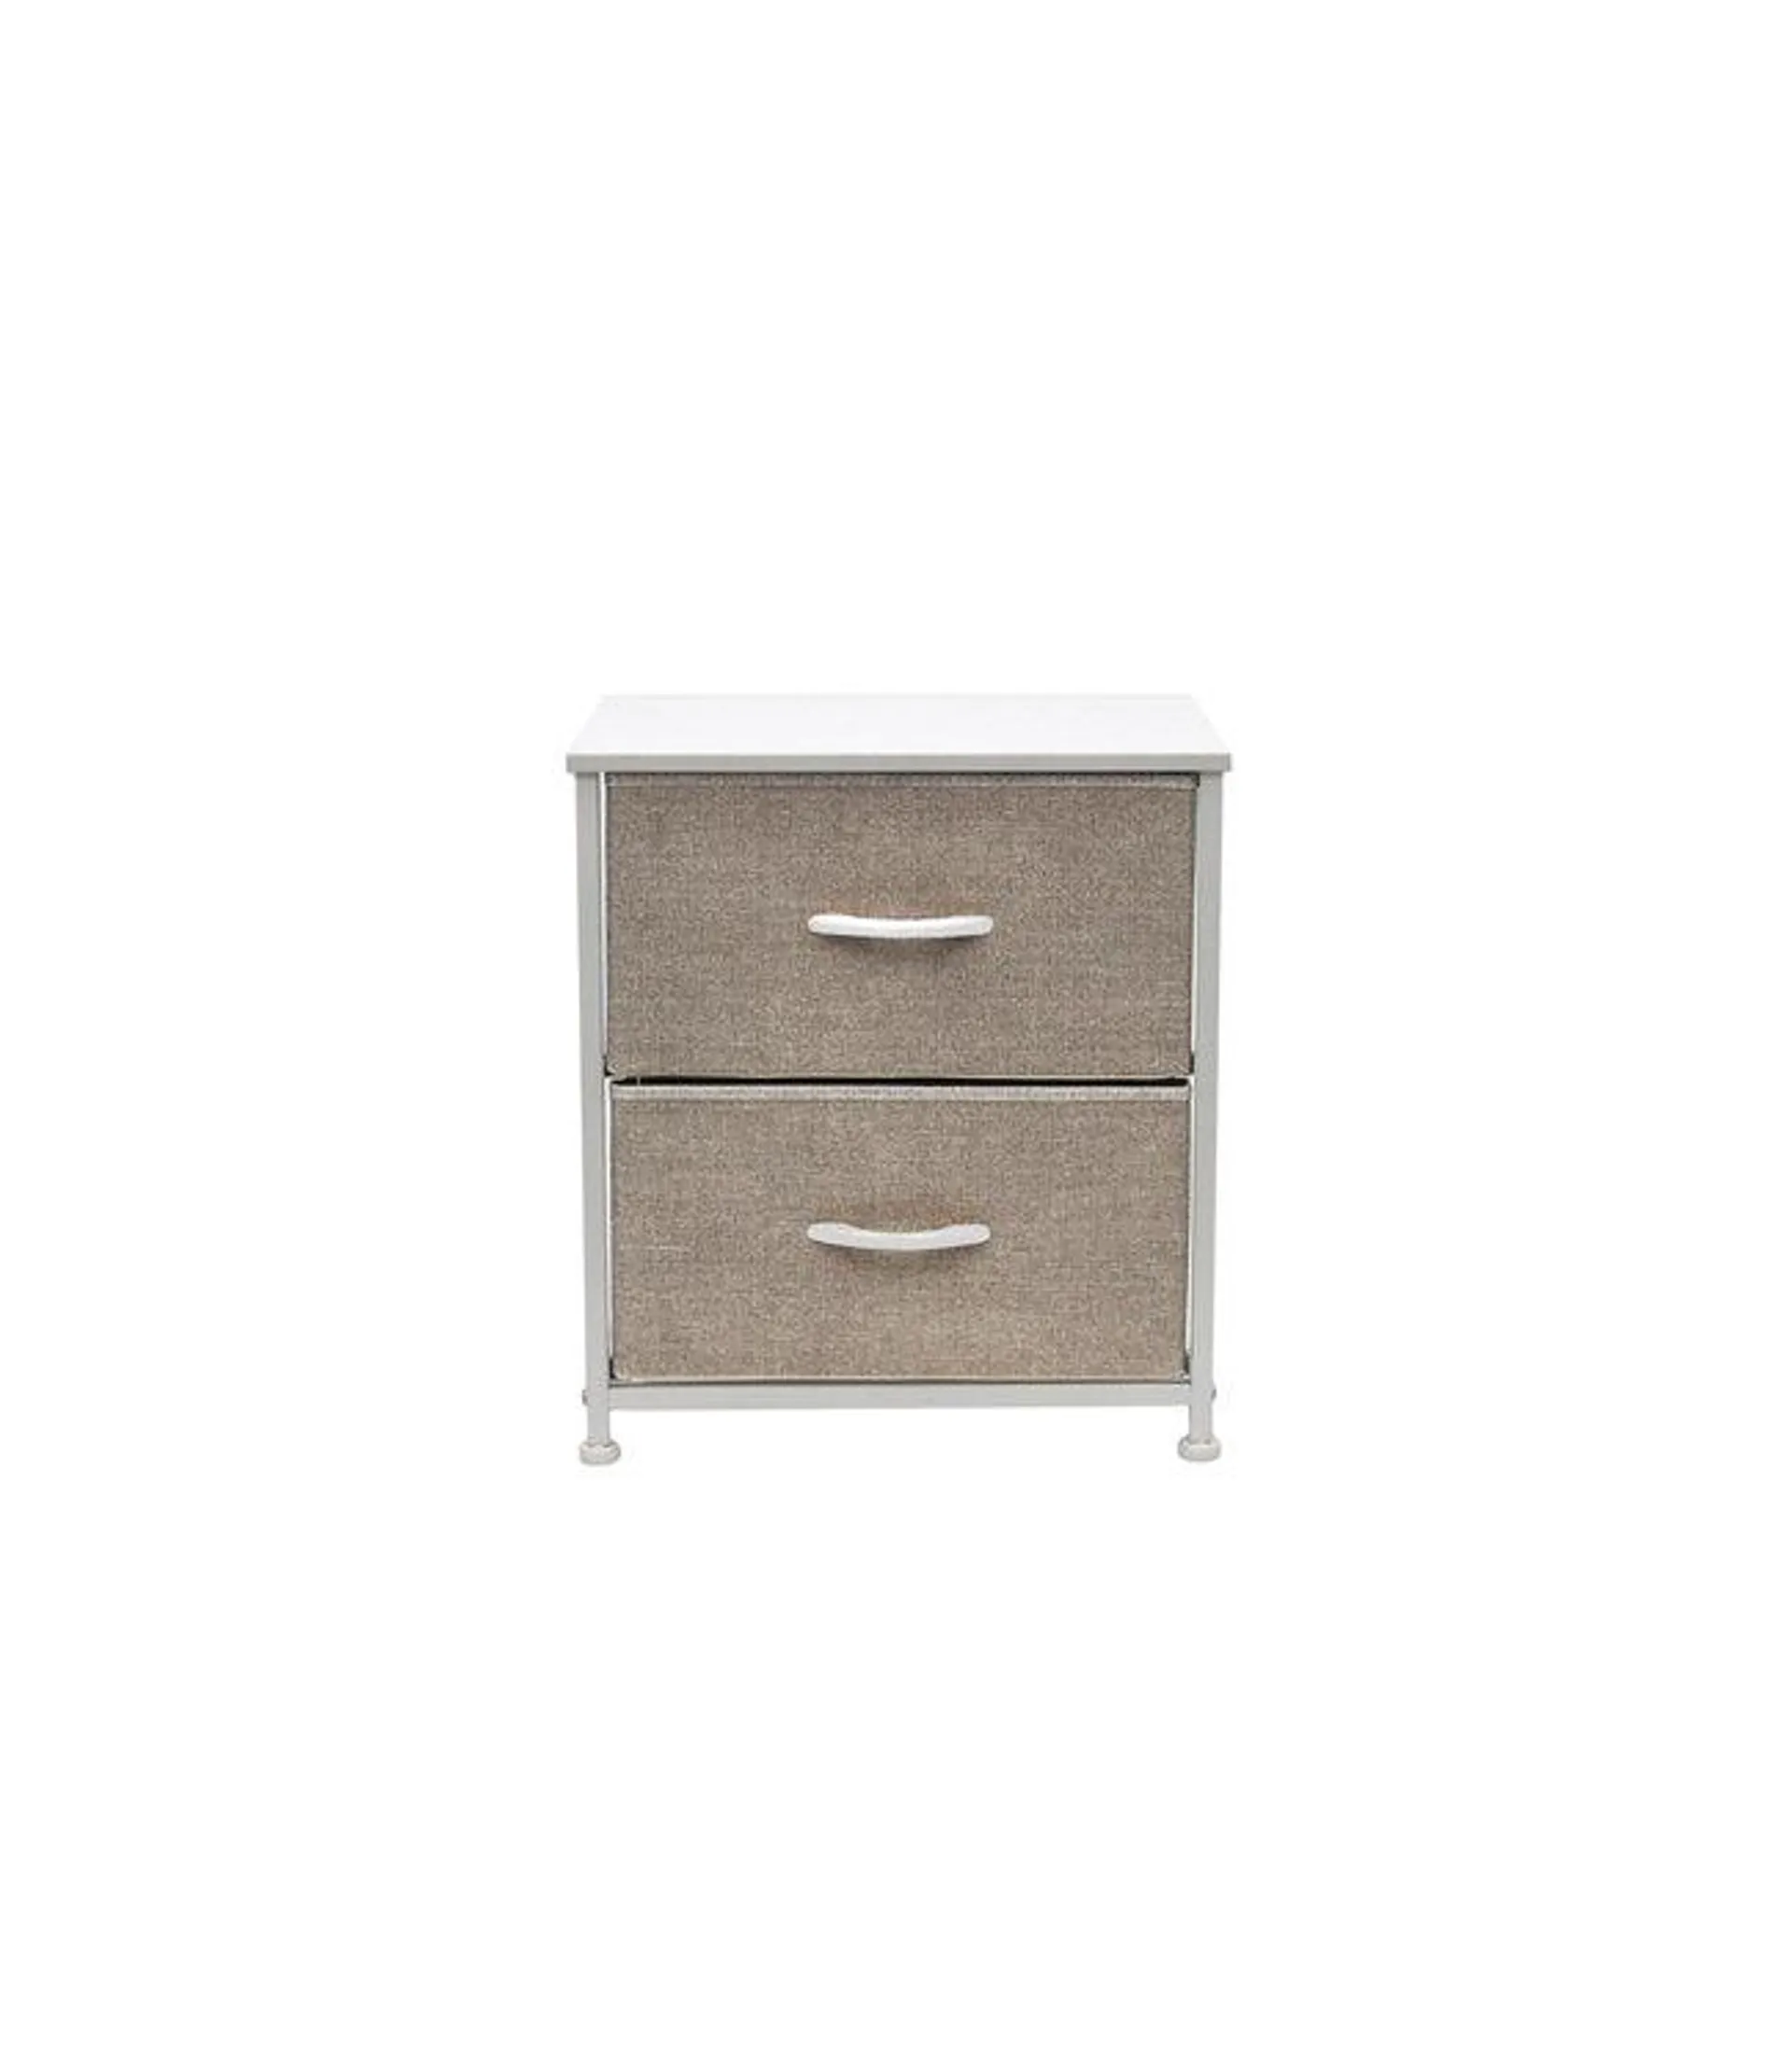 2 DRAWER SIDE TABLE GREY/WHITE